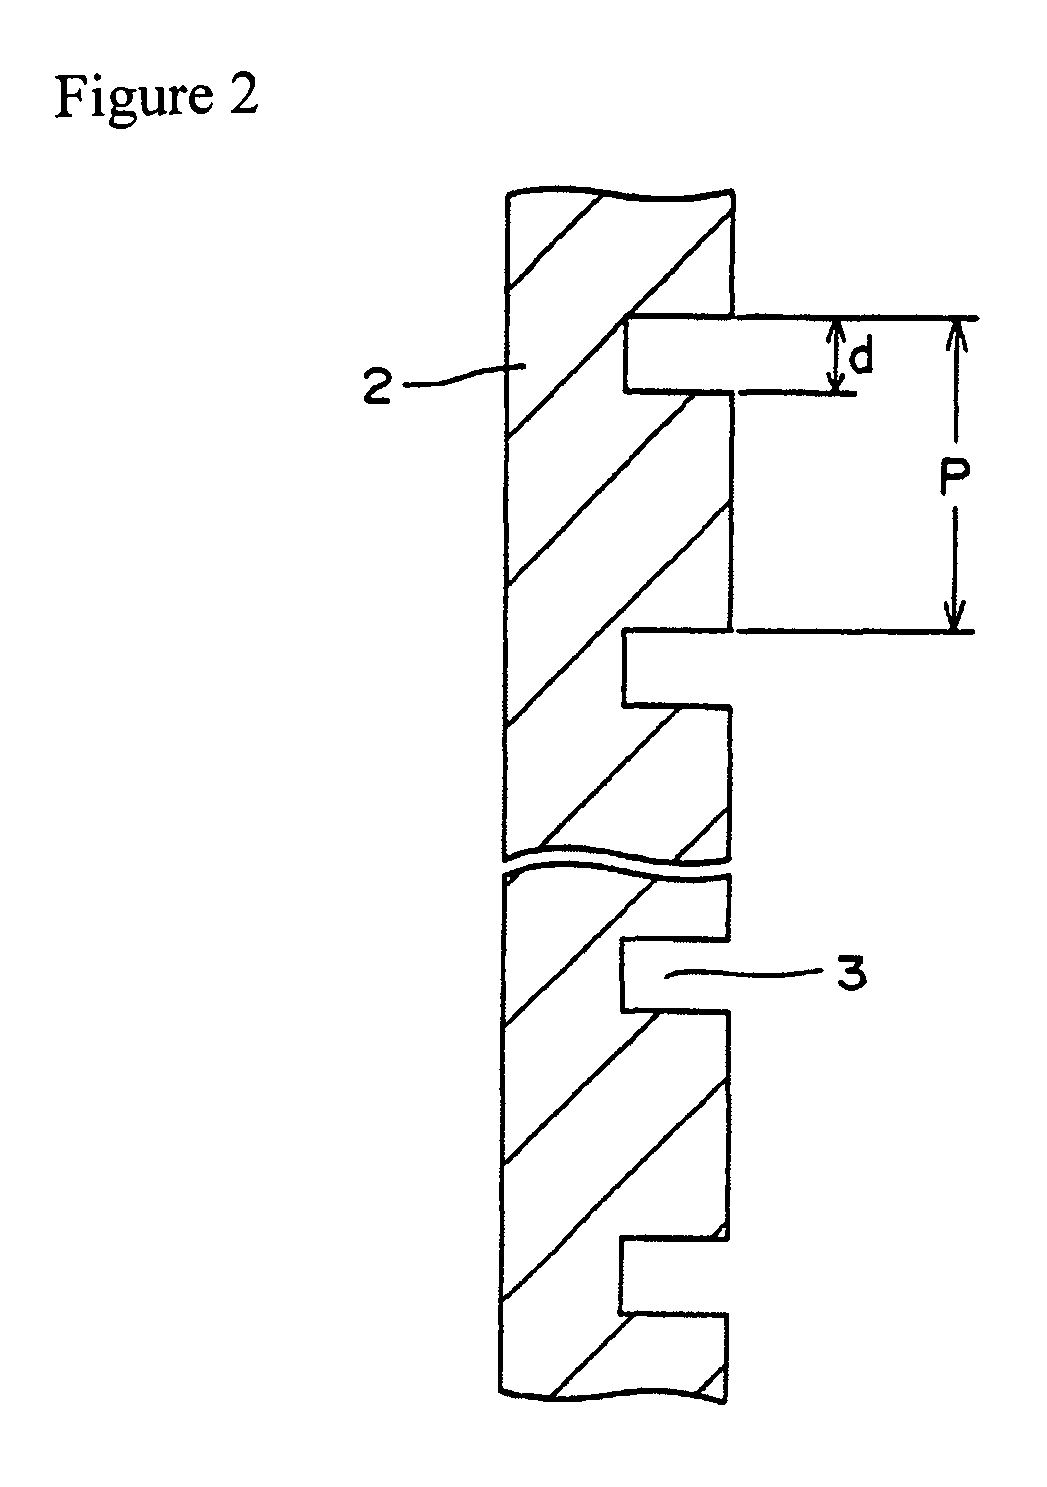 Quartz glass tool for heat treatment of silicon wafer and process for producing the same